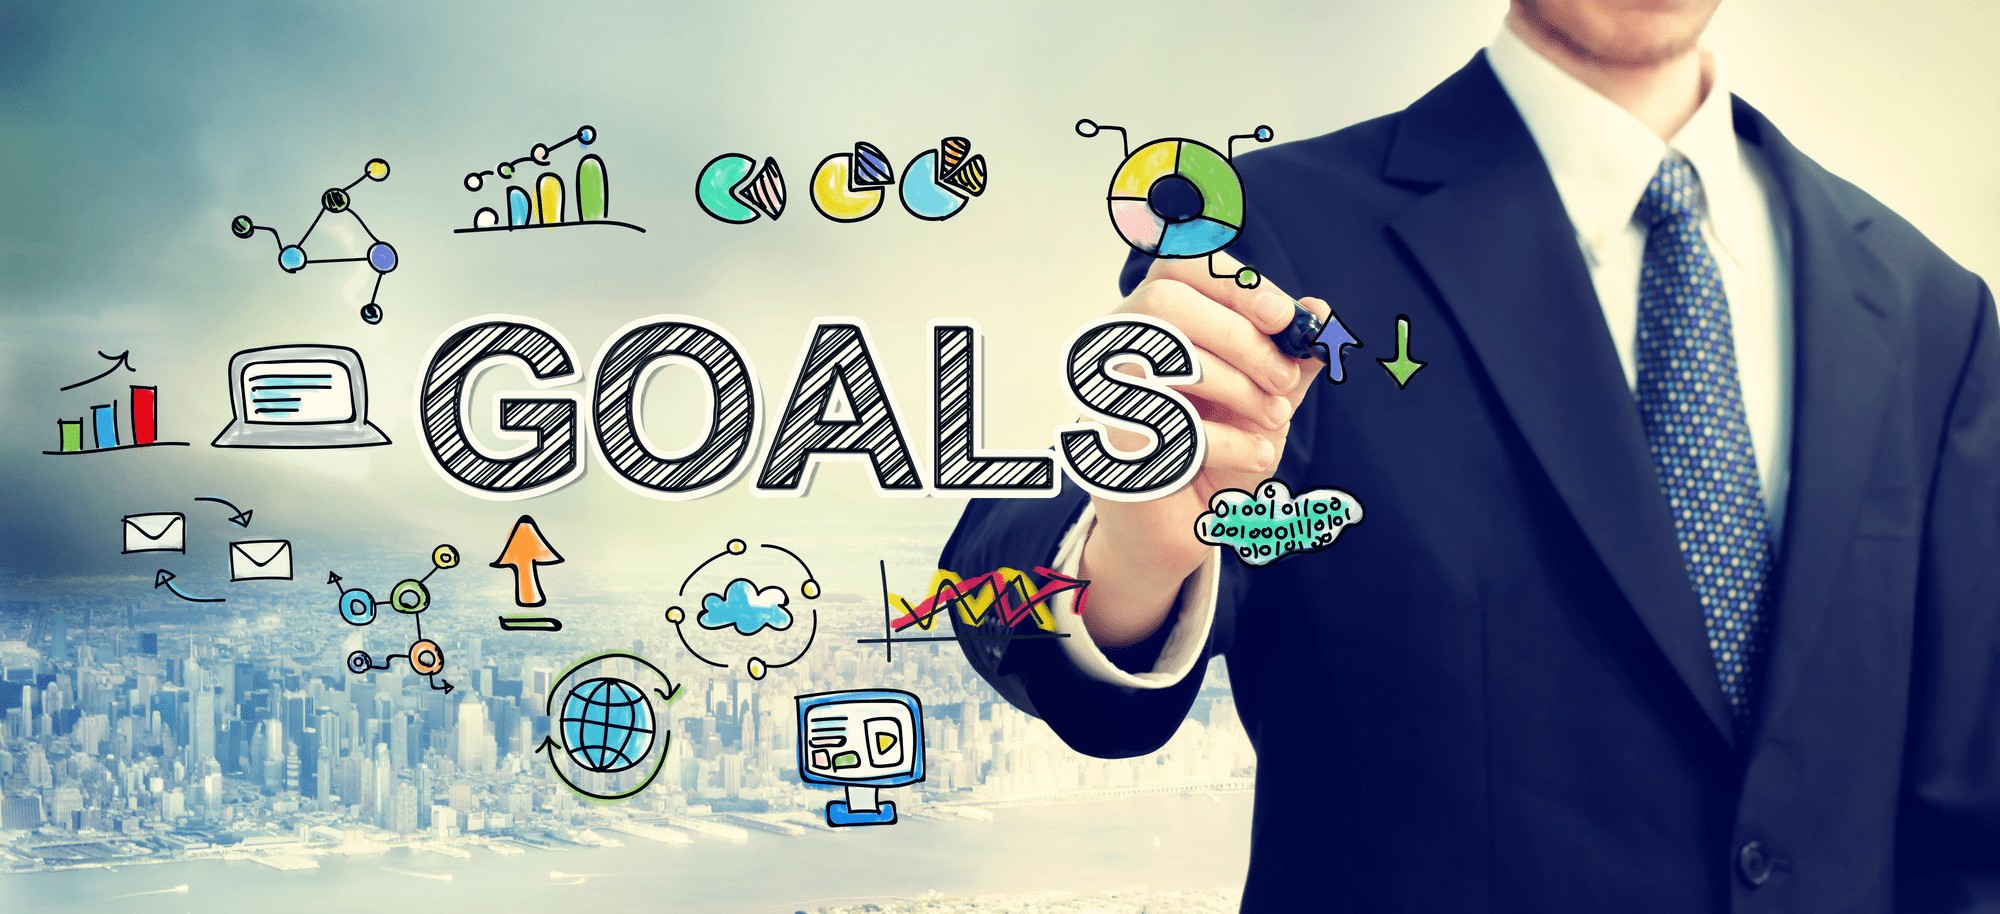 How to Set Realistic Short-Term Business Goals